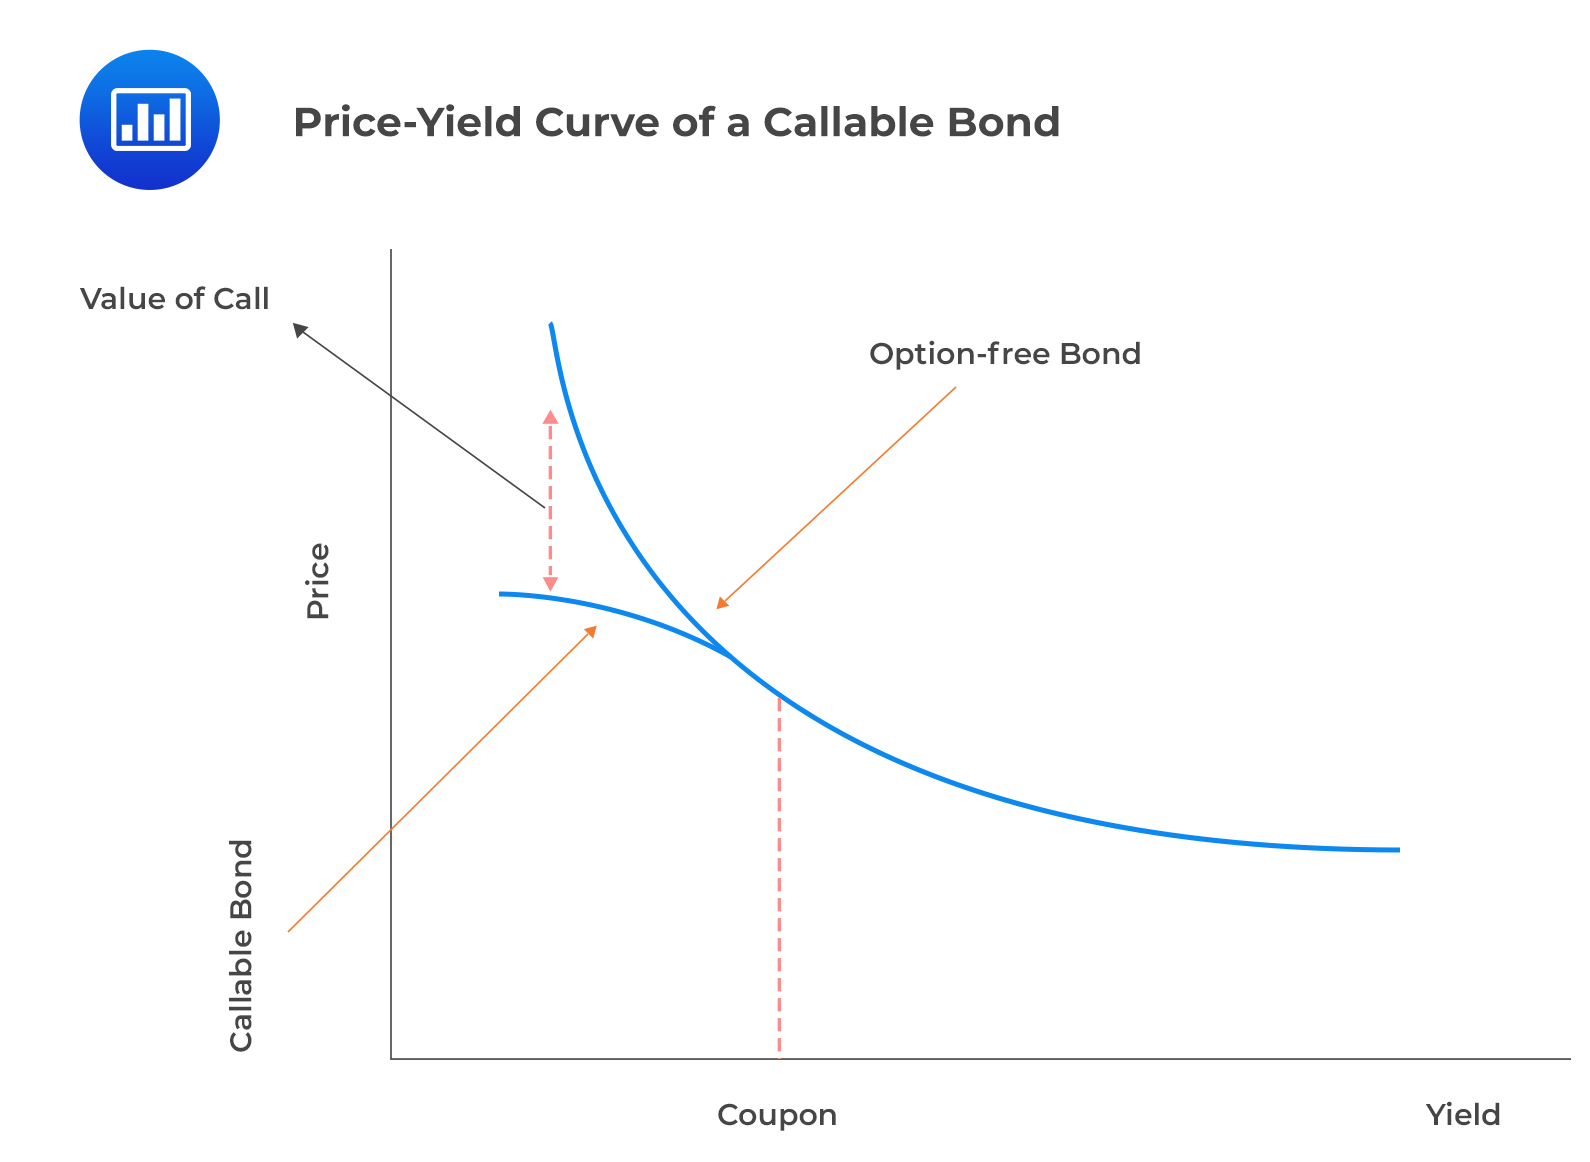 Price-Yield Curve of a Callable Bond